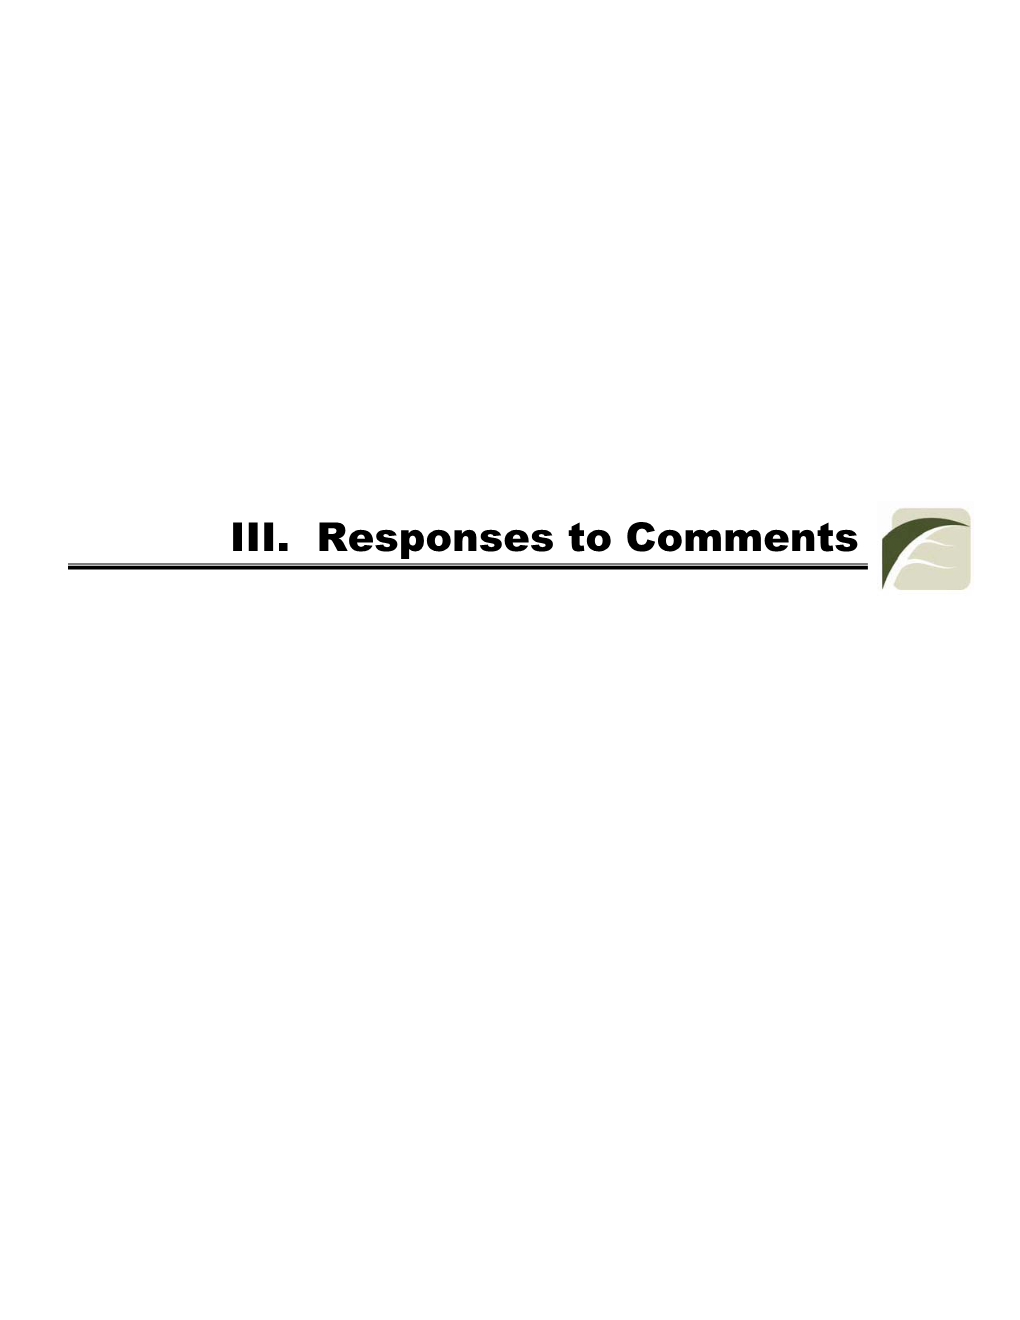 III. Responses to Comments